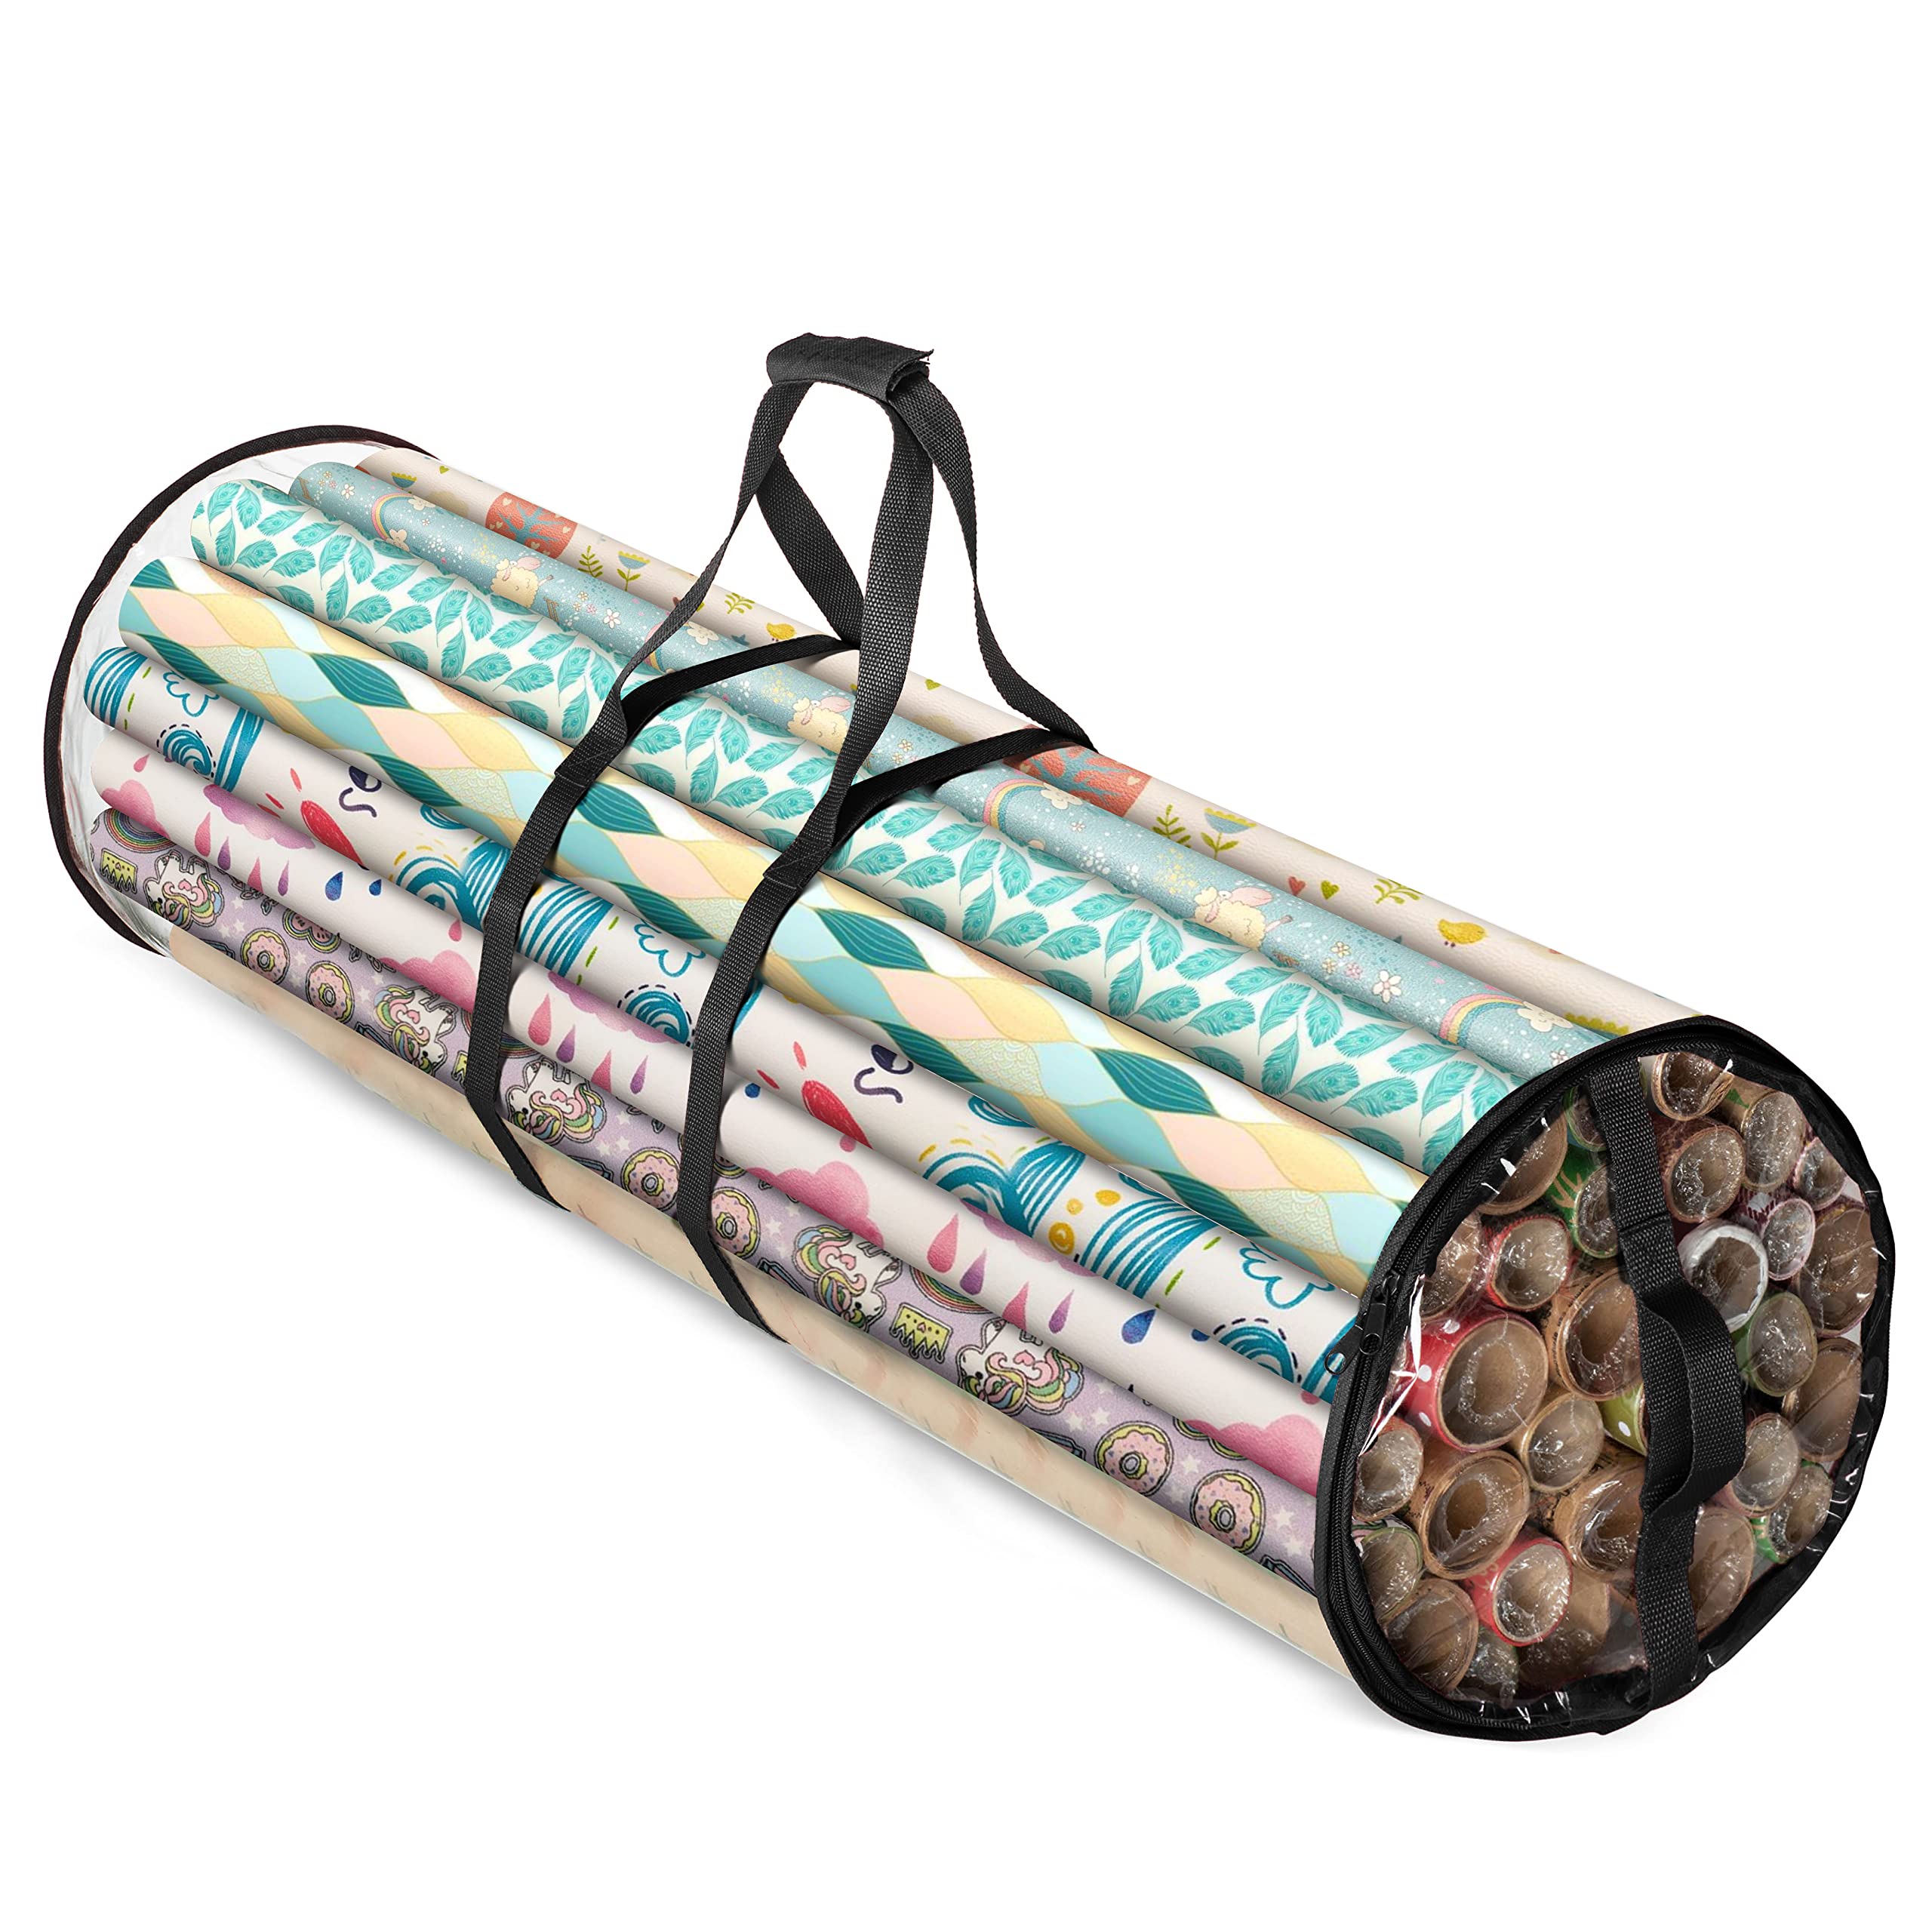 ZOBER Wrapping Paper Storage Container - Fits 14 to 20 Standard Rolls Up to 40